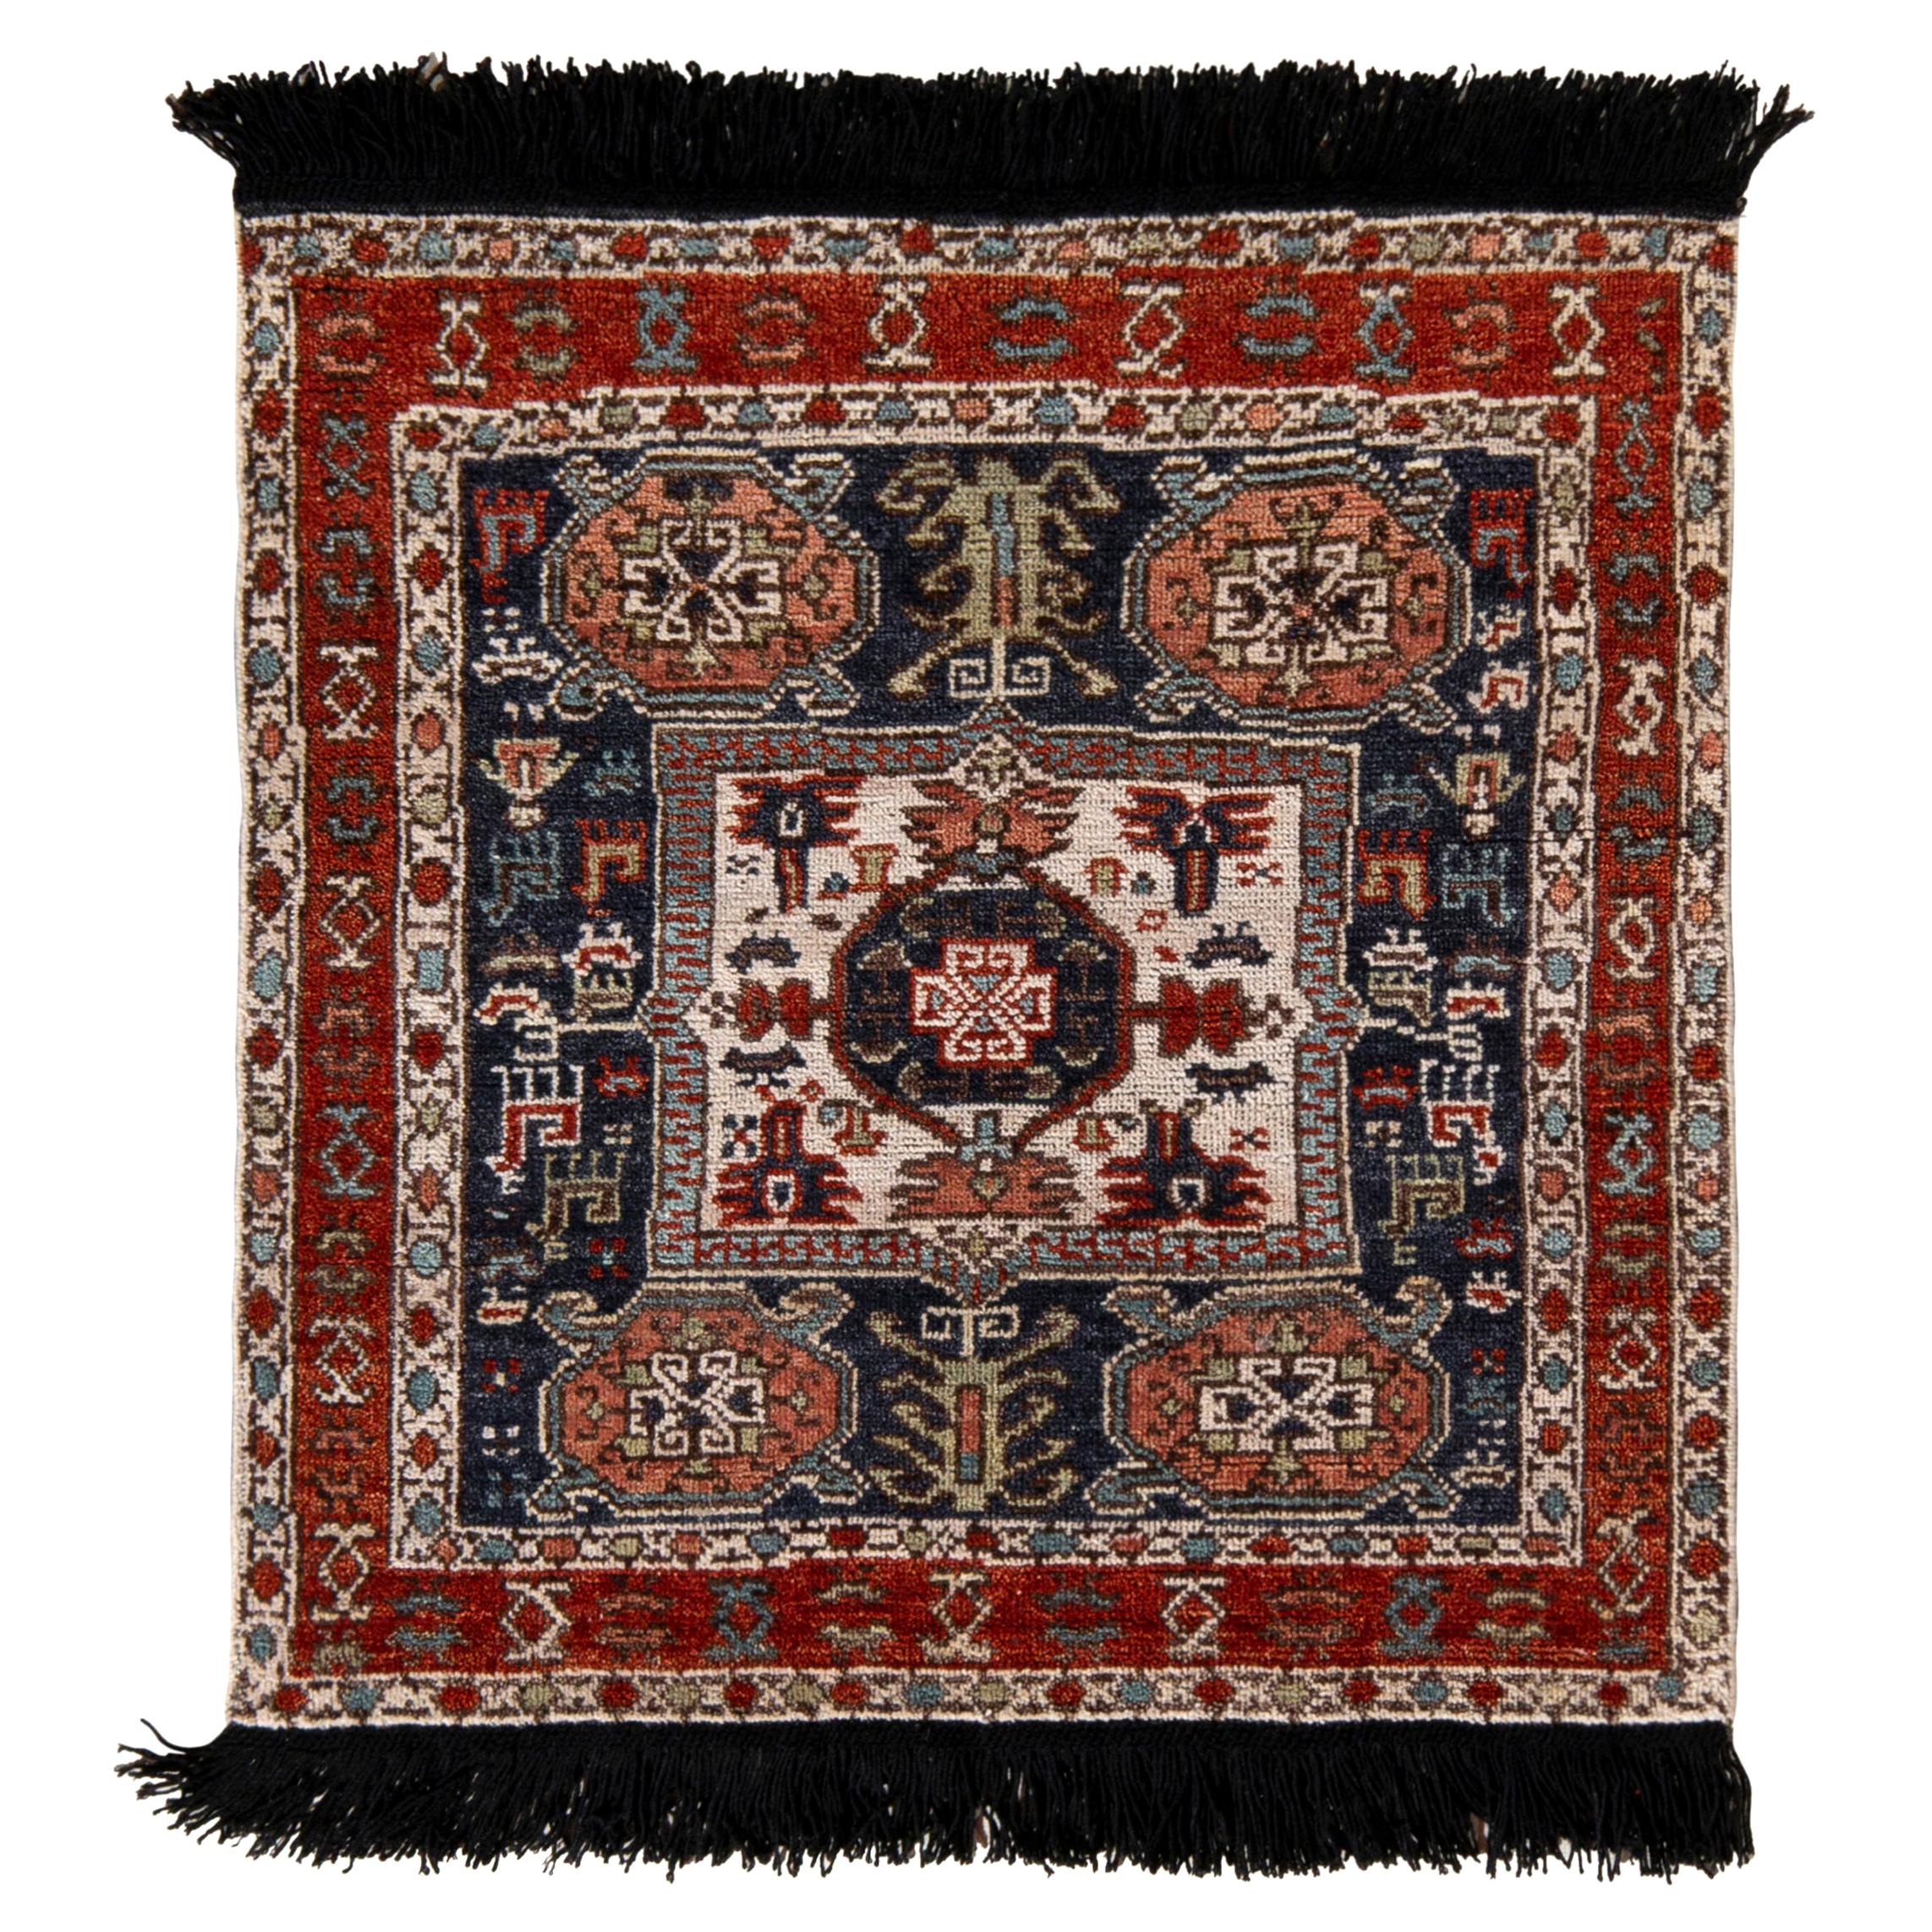 Rug & Kilim’s Tribal Style Square Rug in Red and Blue Geometric Pattern